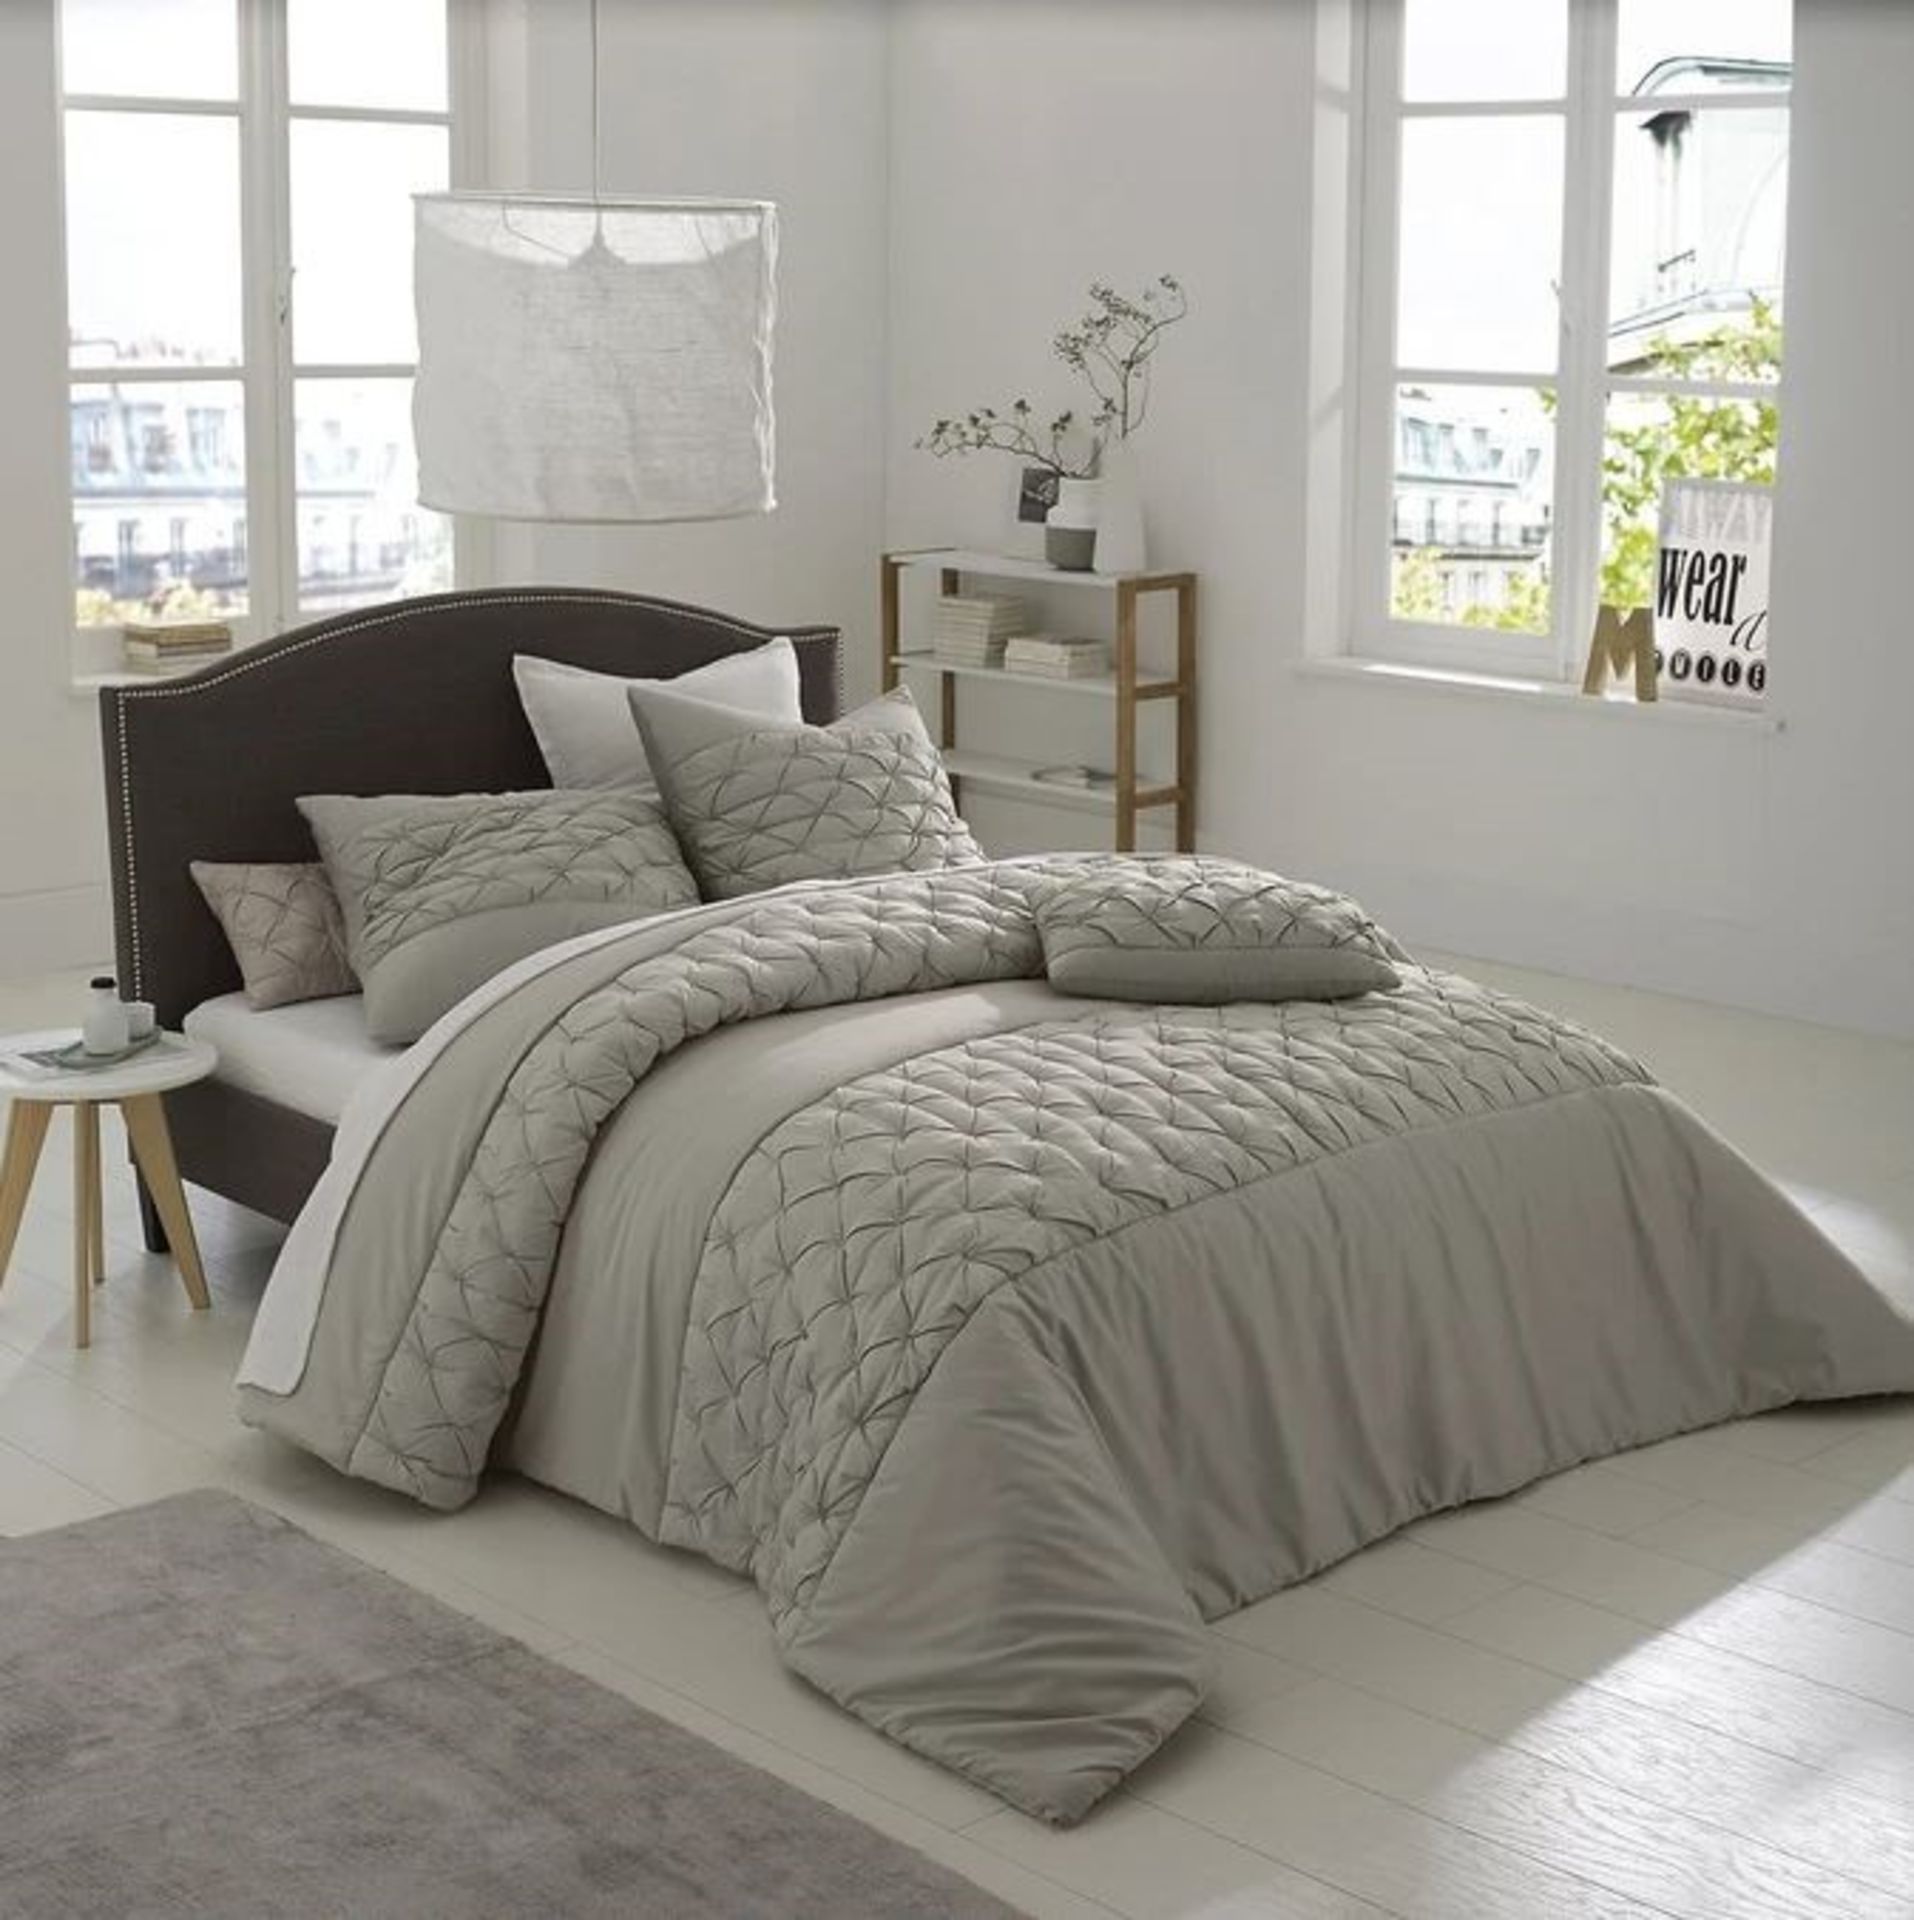 KHIN COTTON SATION BEDSPREAD / SIZE: 230 X 250cm / RRP £180.00 / GRADE A: LIKE NEW, NO APPARENT